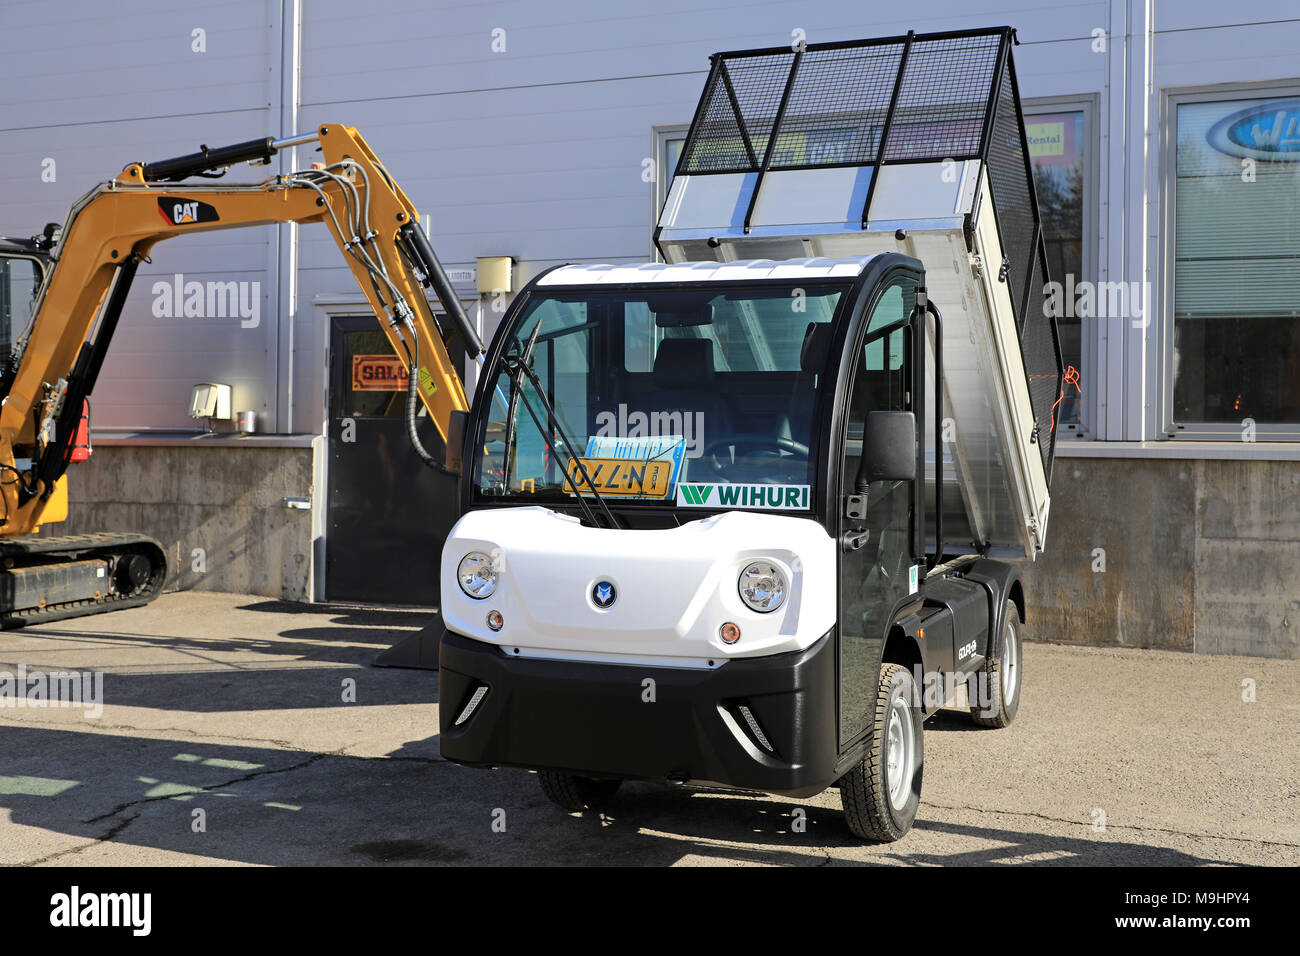 LIETO, FINLAND - MARCH 24, 2018: Goupil G4 electric utility vehicle seen at the annual public event of Konekaupan Villi Lansi Machinery Sales. Stock Photo